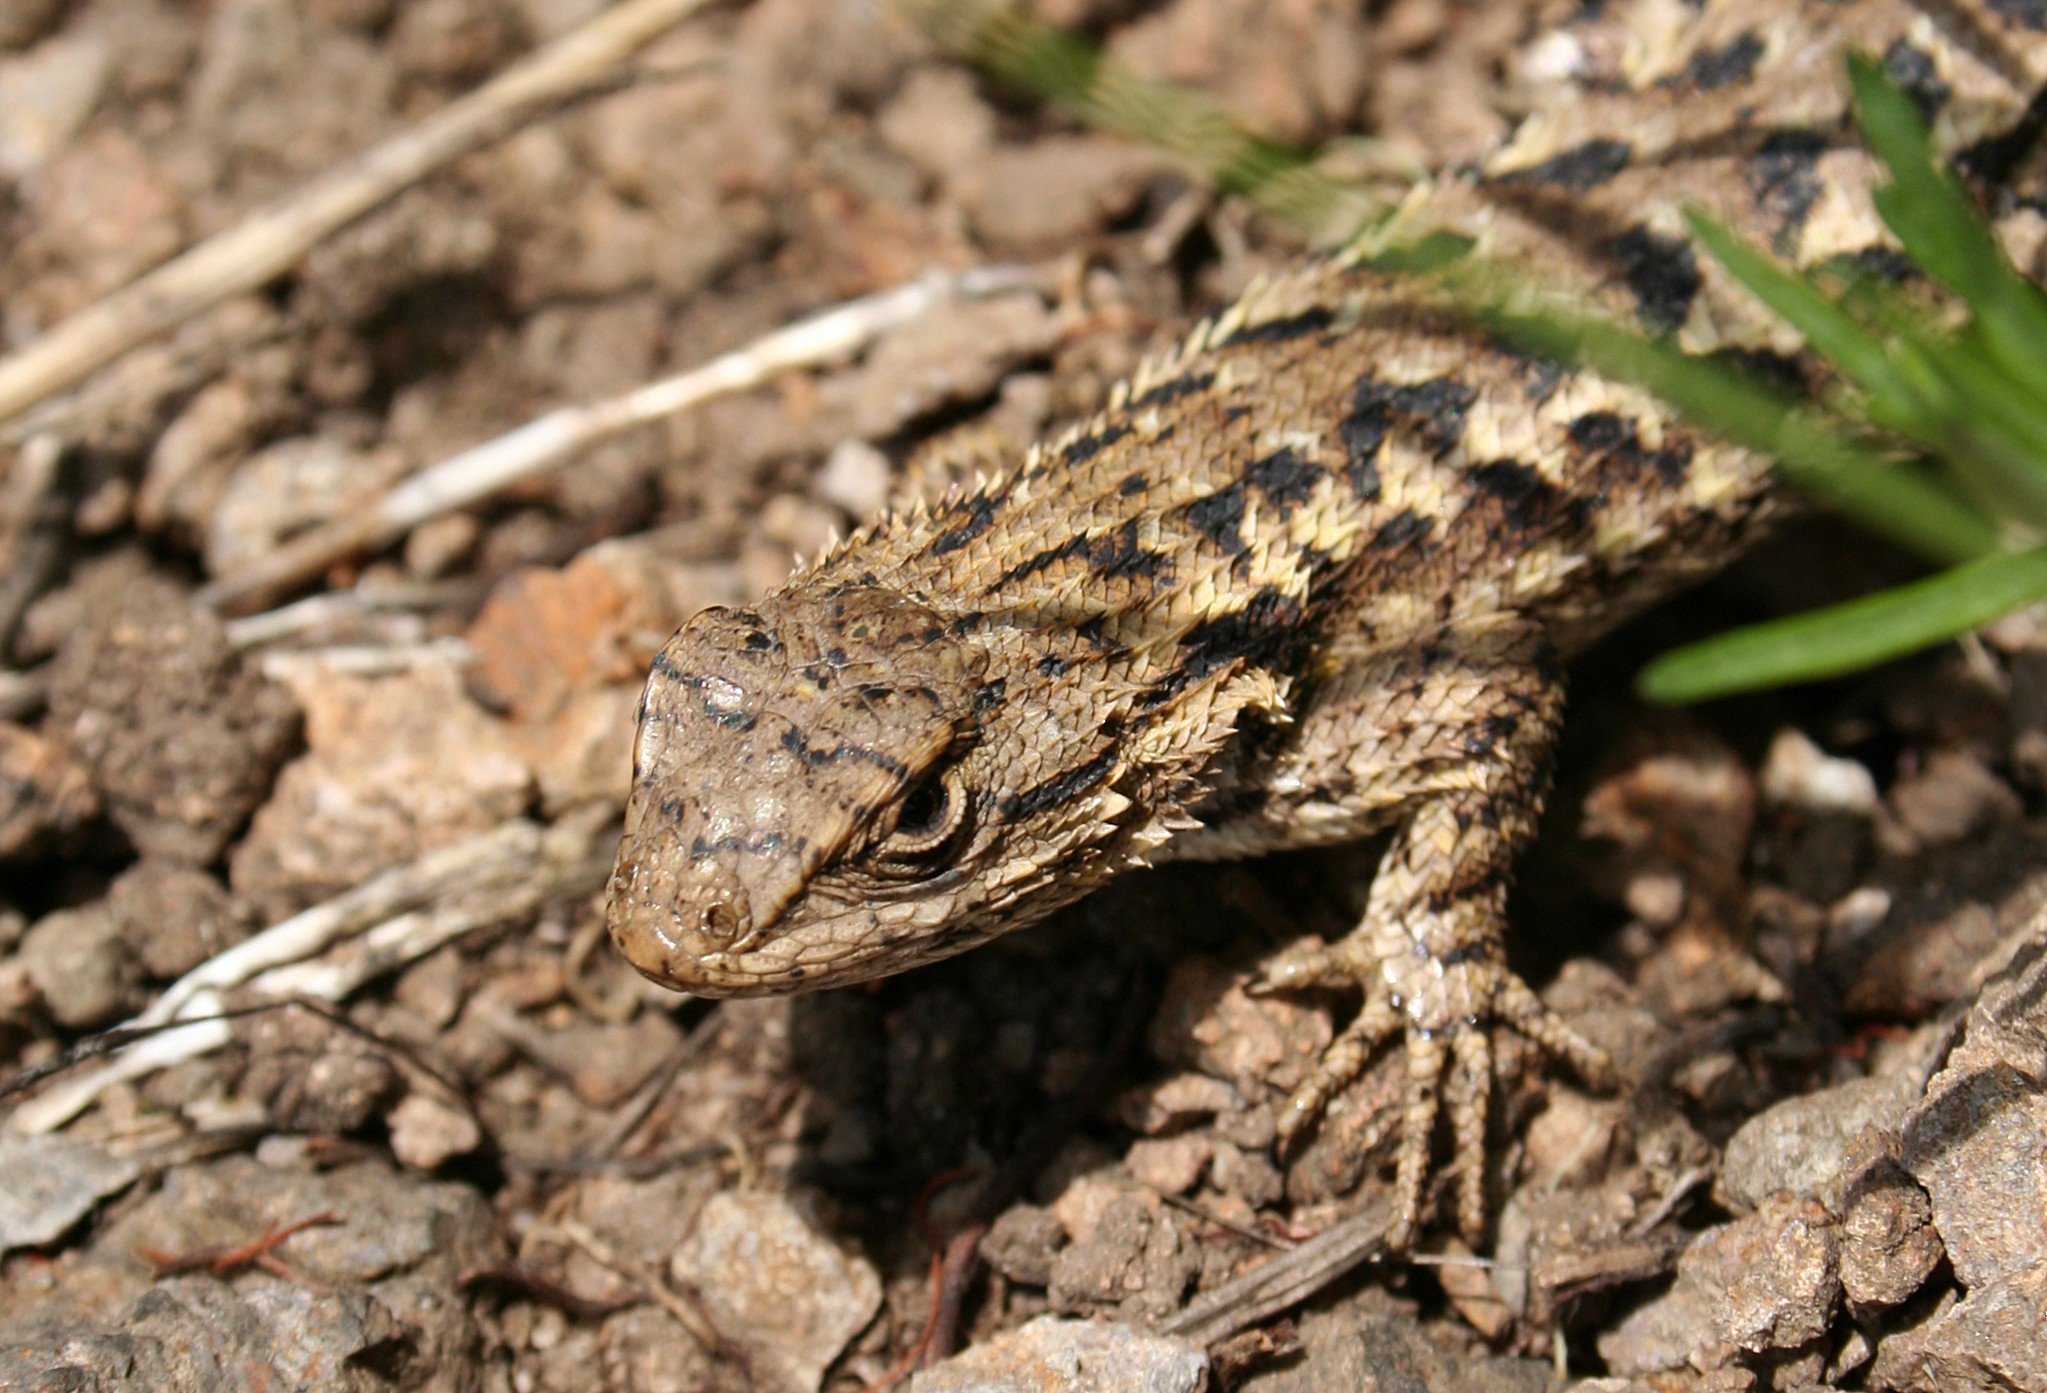 Fence lizard, photo by Calibas - own work, CC BY-SA 3.0, https://commons.wikimedia.org/w/index.php?curid=2967183